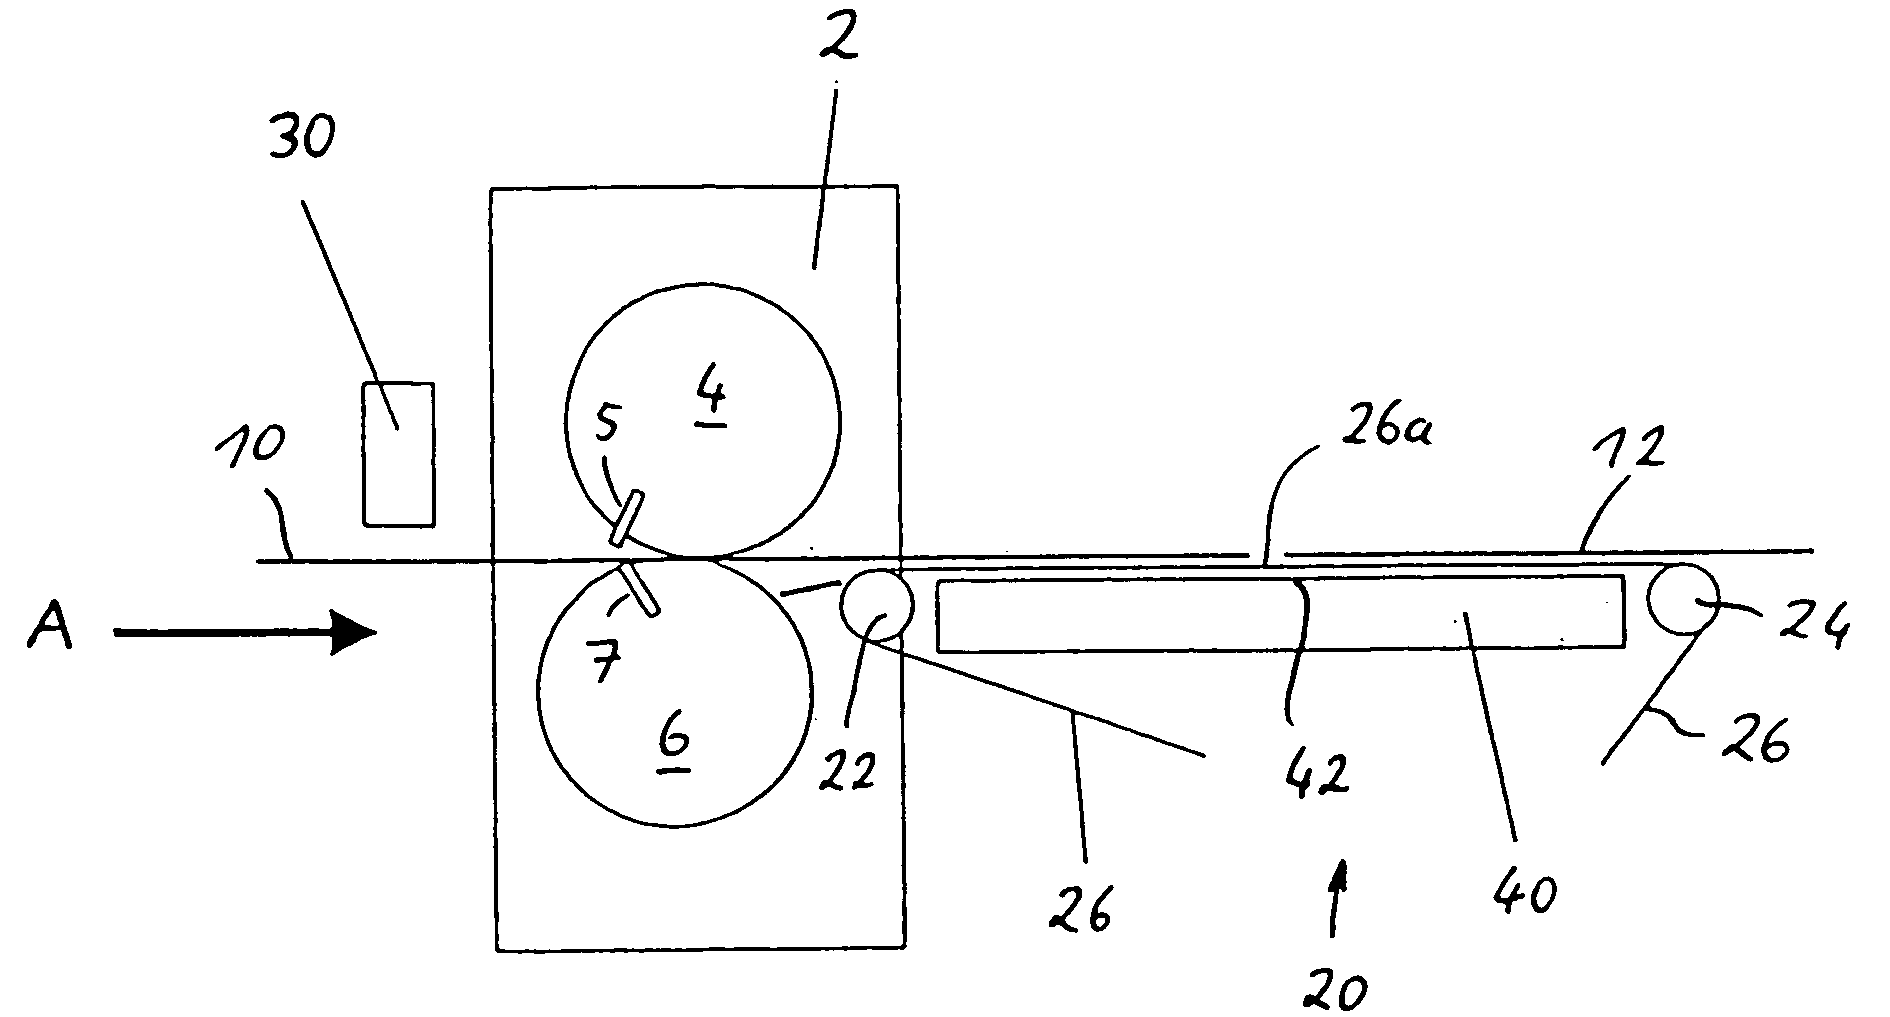 Apparatus for treating elongated multi-layer webs of electrostatically chargeable material